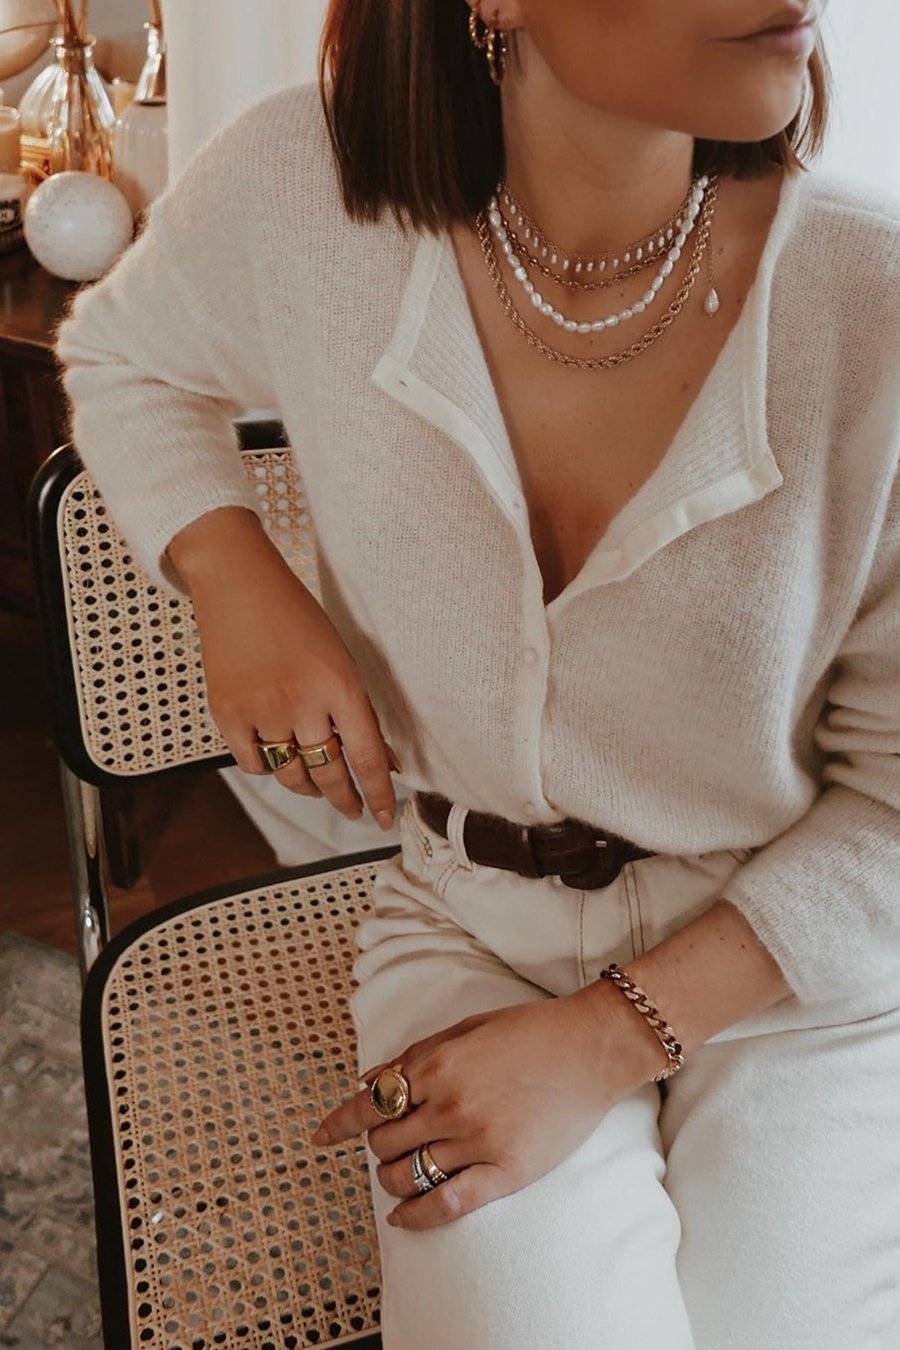 Jacey Classic Pearl Necklace - Boutique Minimaliste has waterproof, durable, elegant and vintage inspired jewelry